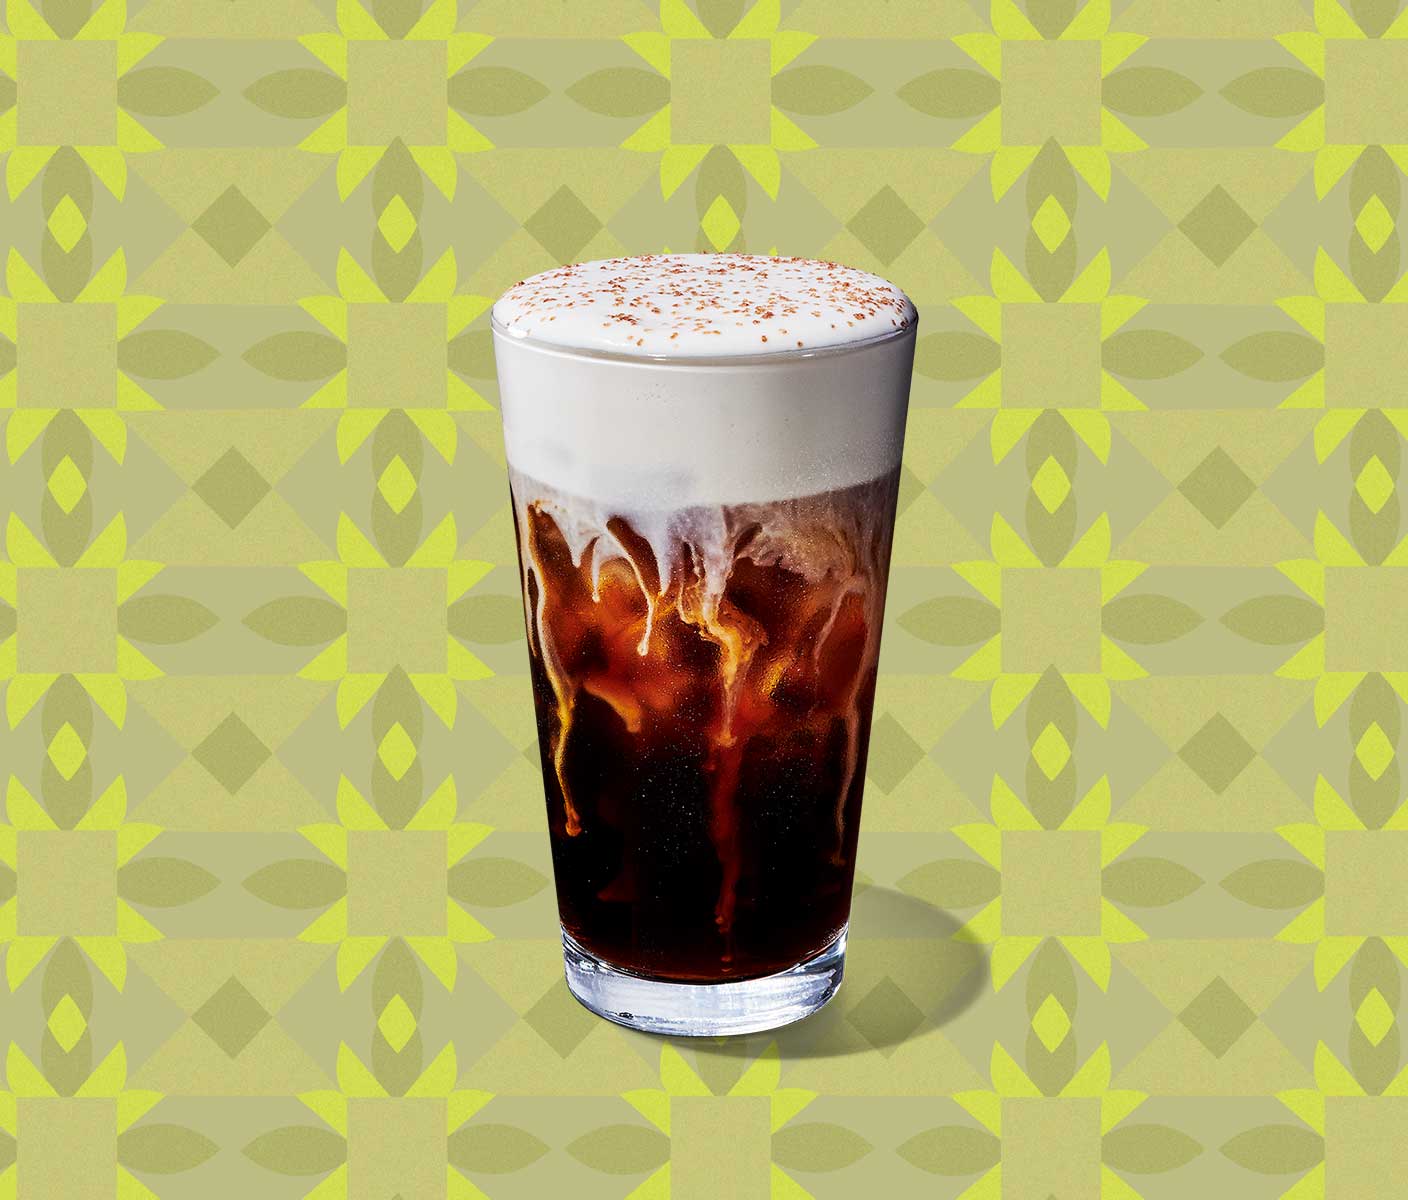 A cold coffee with thick, foamy topping in a tall, clear glass.